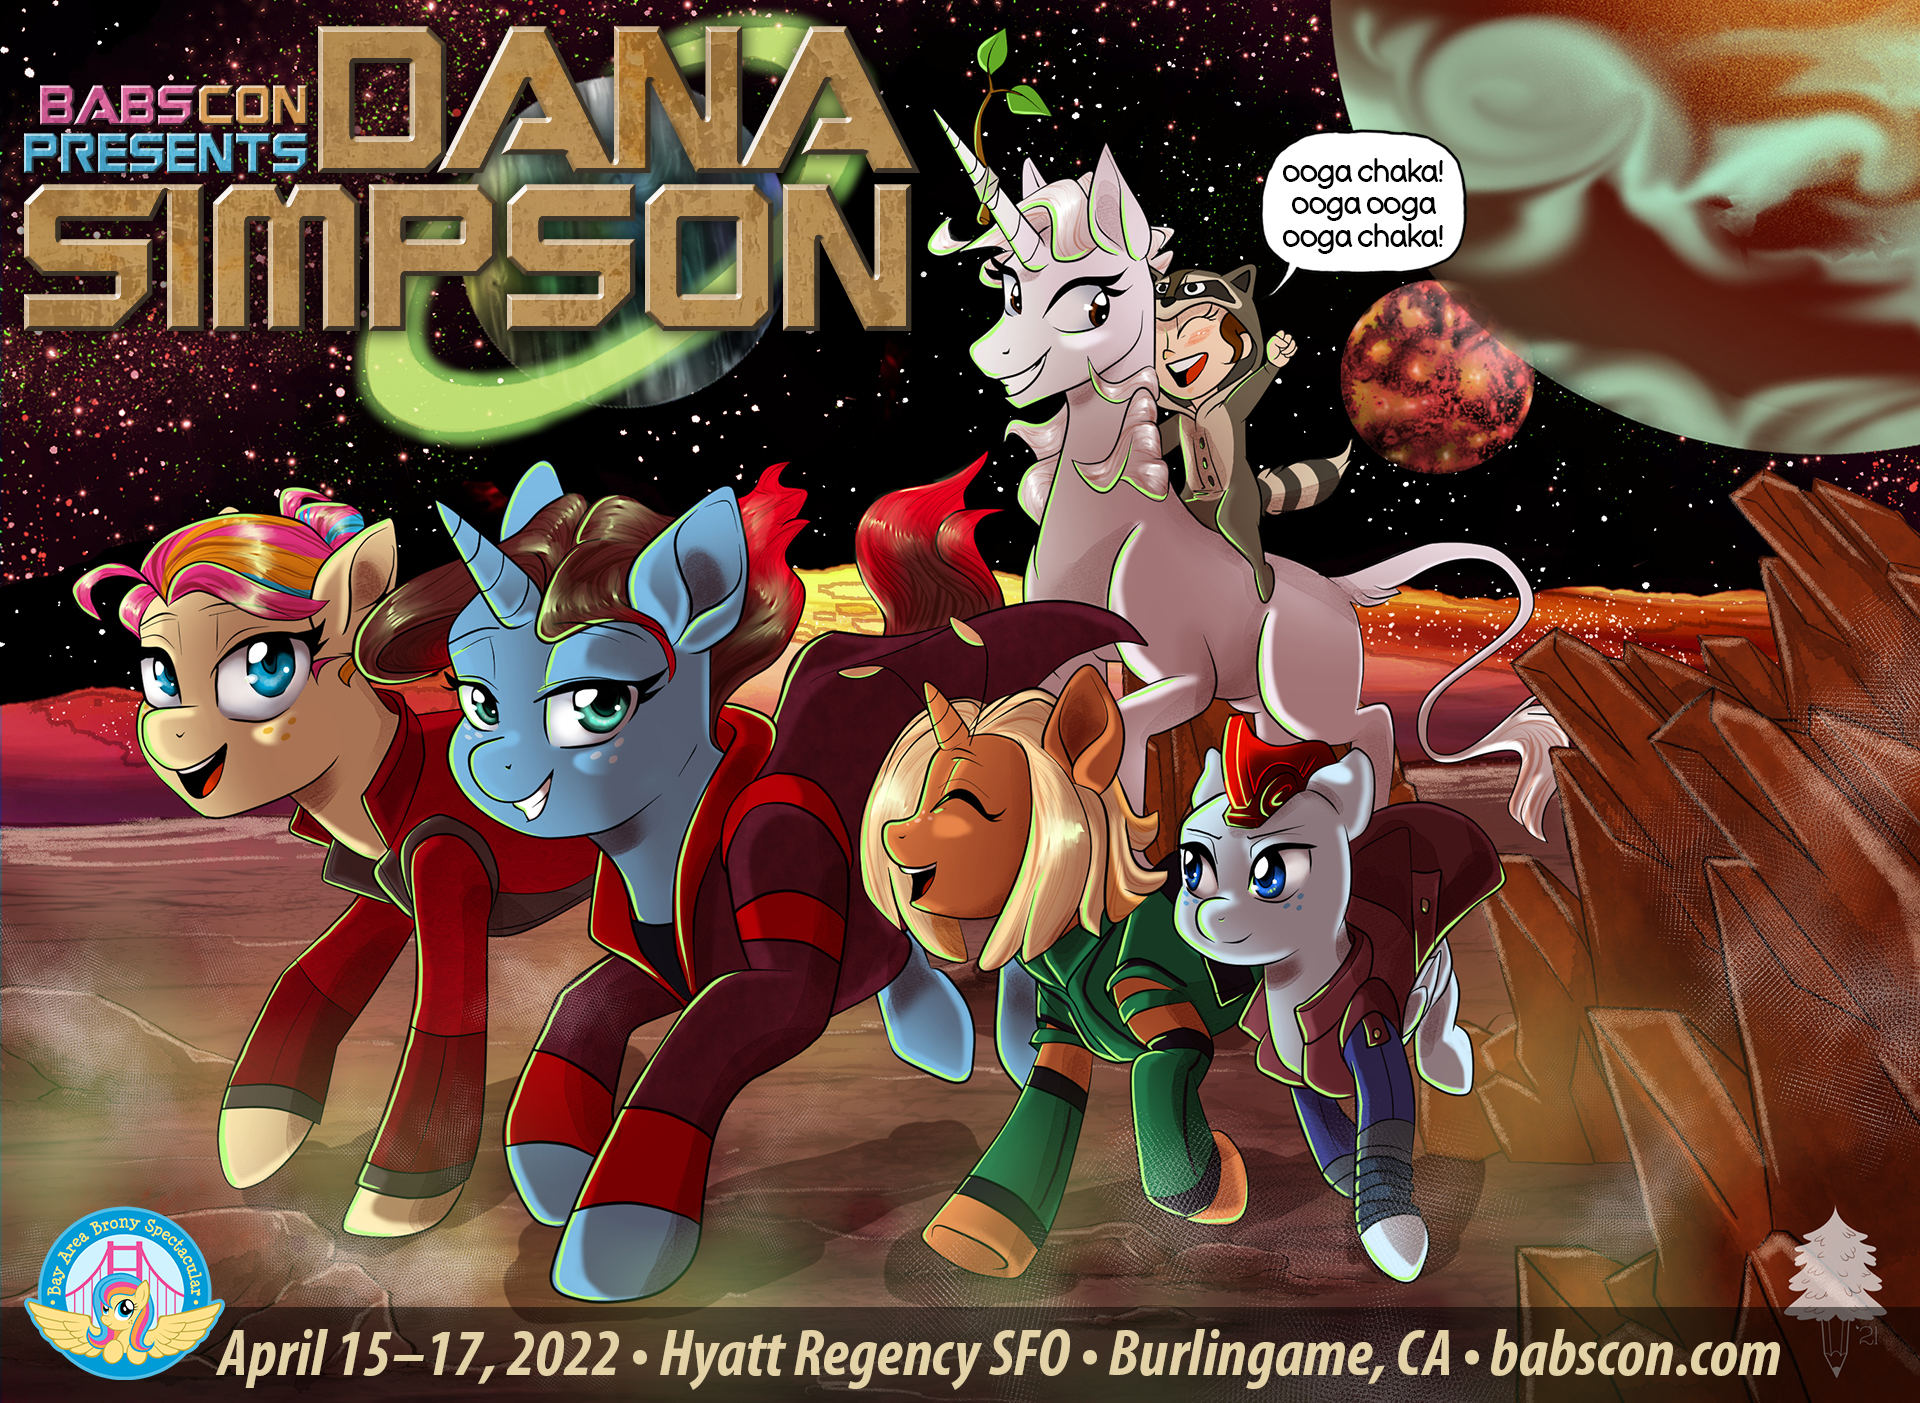 BABSCon 2022 Guards the Galaxy with Dana Simpson